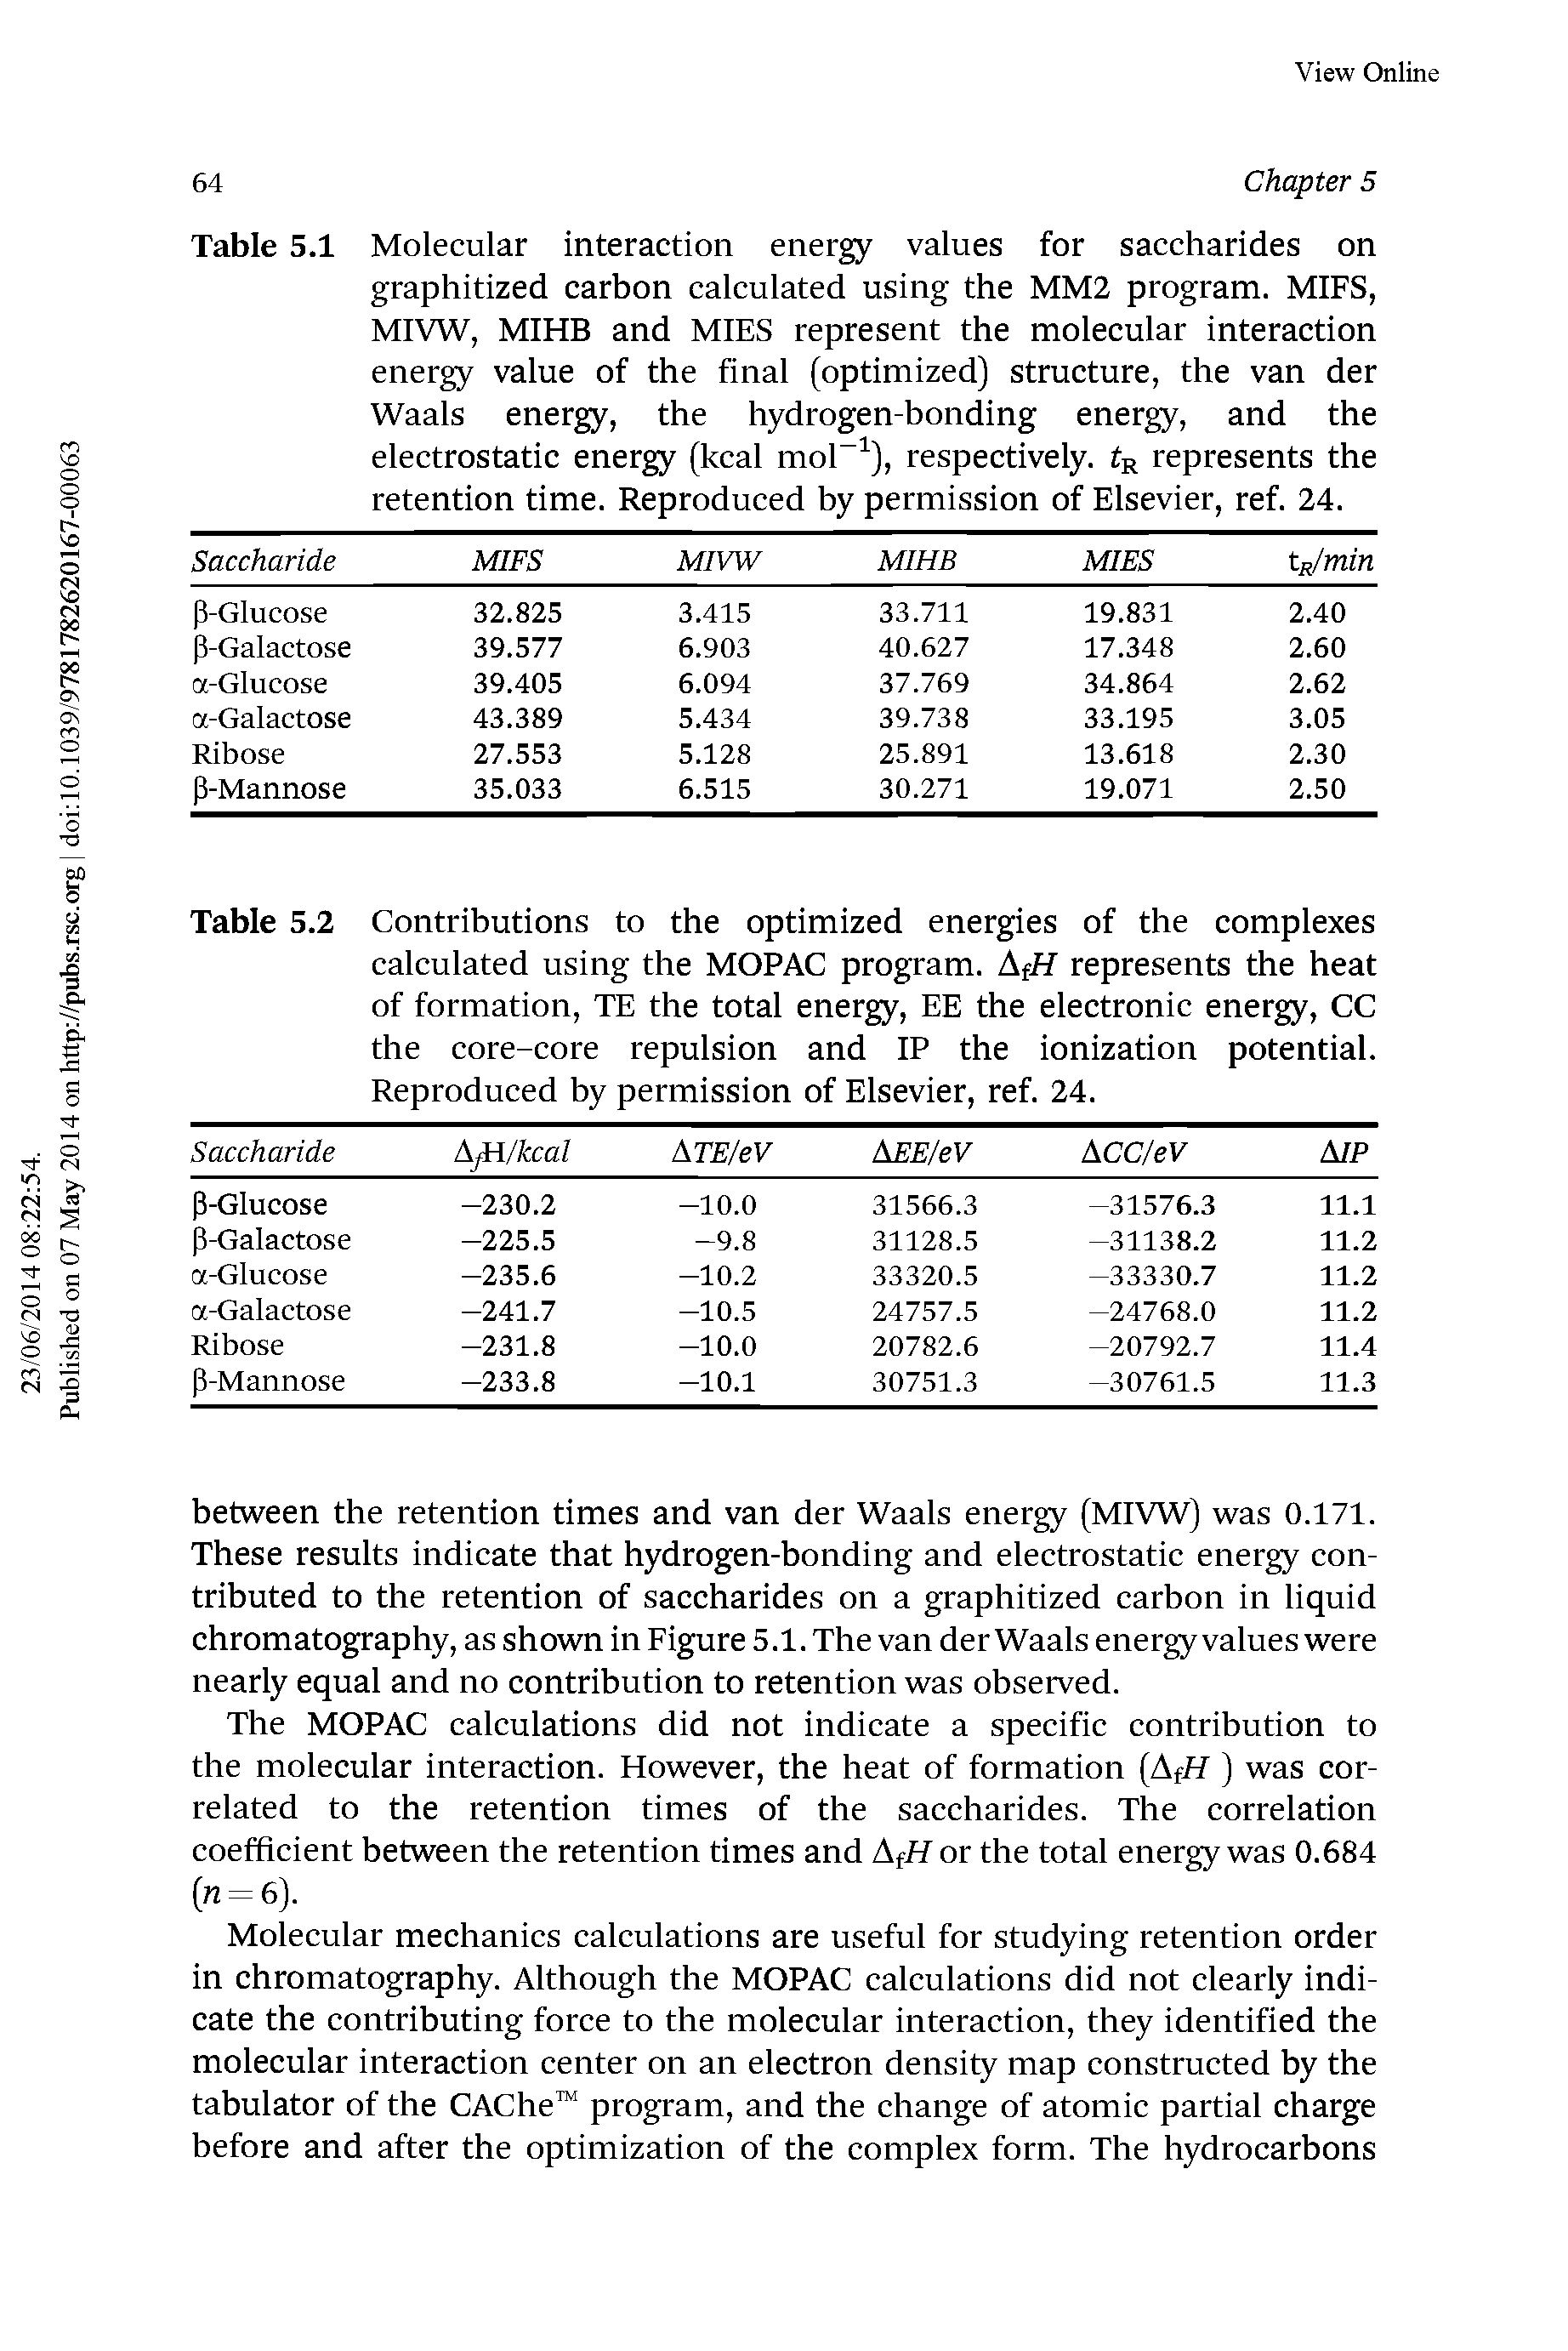 Table 5.1 Molecular interaction energy values for saccharides on graphitized carbon calculated using the MM2 program. MIPS, MIVW, MIHB and MIES represent the molecular interaction energy value of the final (optimized) structure, the van der Waals energy, the hydrogen-bonding energy, and the electrostatic energy (kcal mol ), respectively. tR represents the retention time. Reproduced by permission of Elsevier, ref. 24.